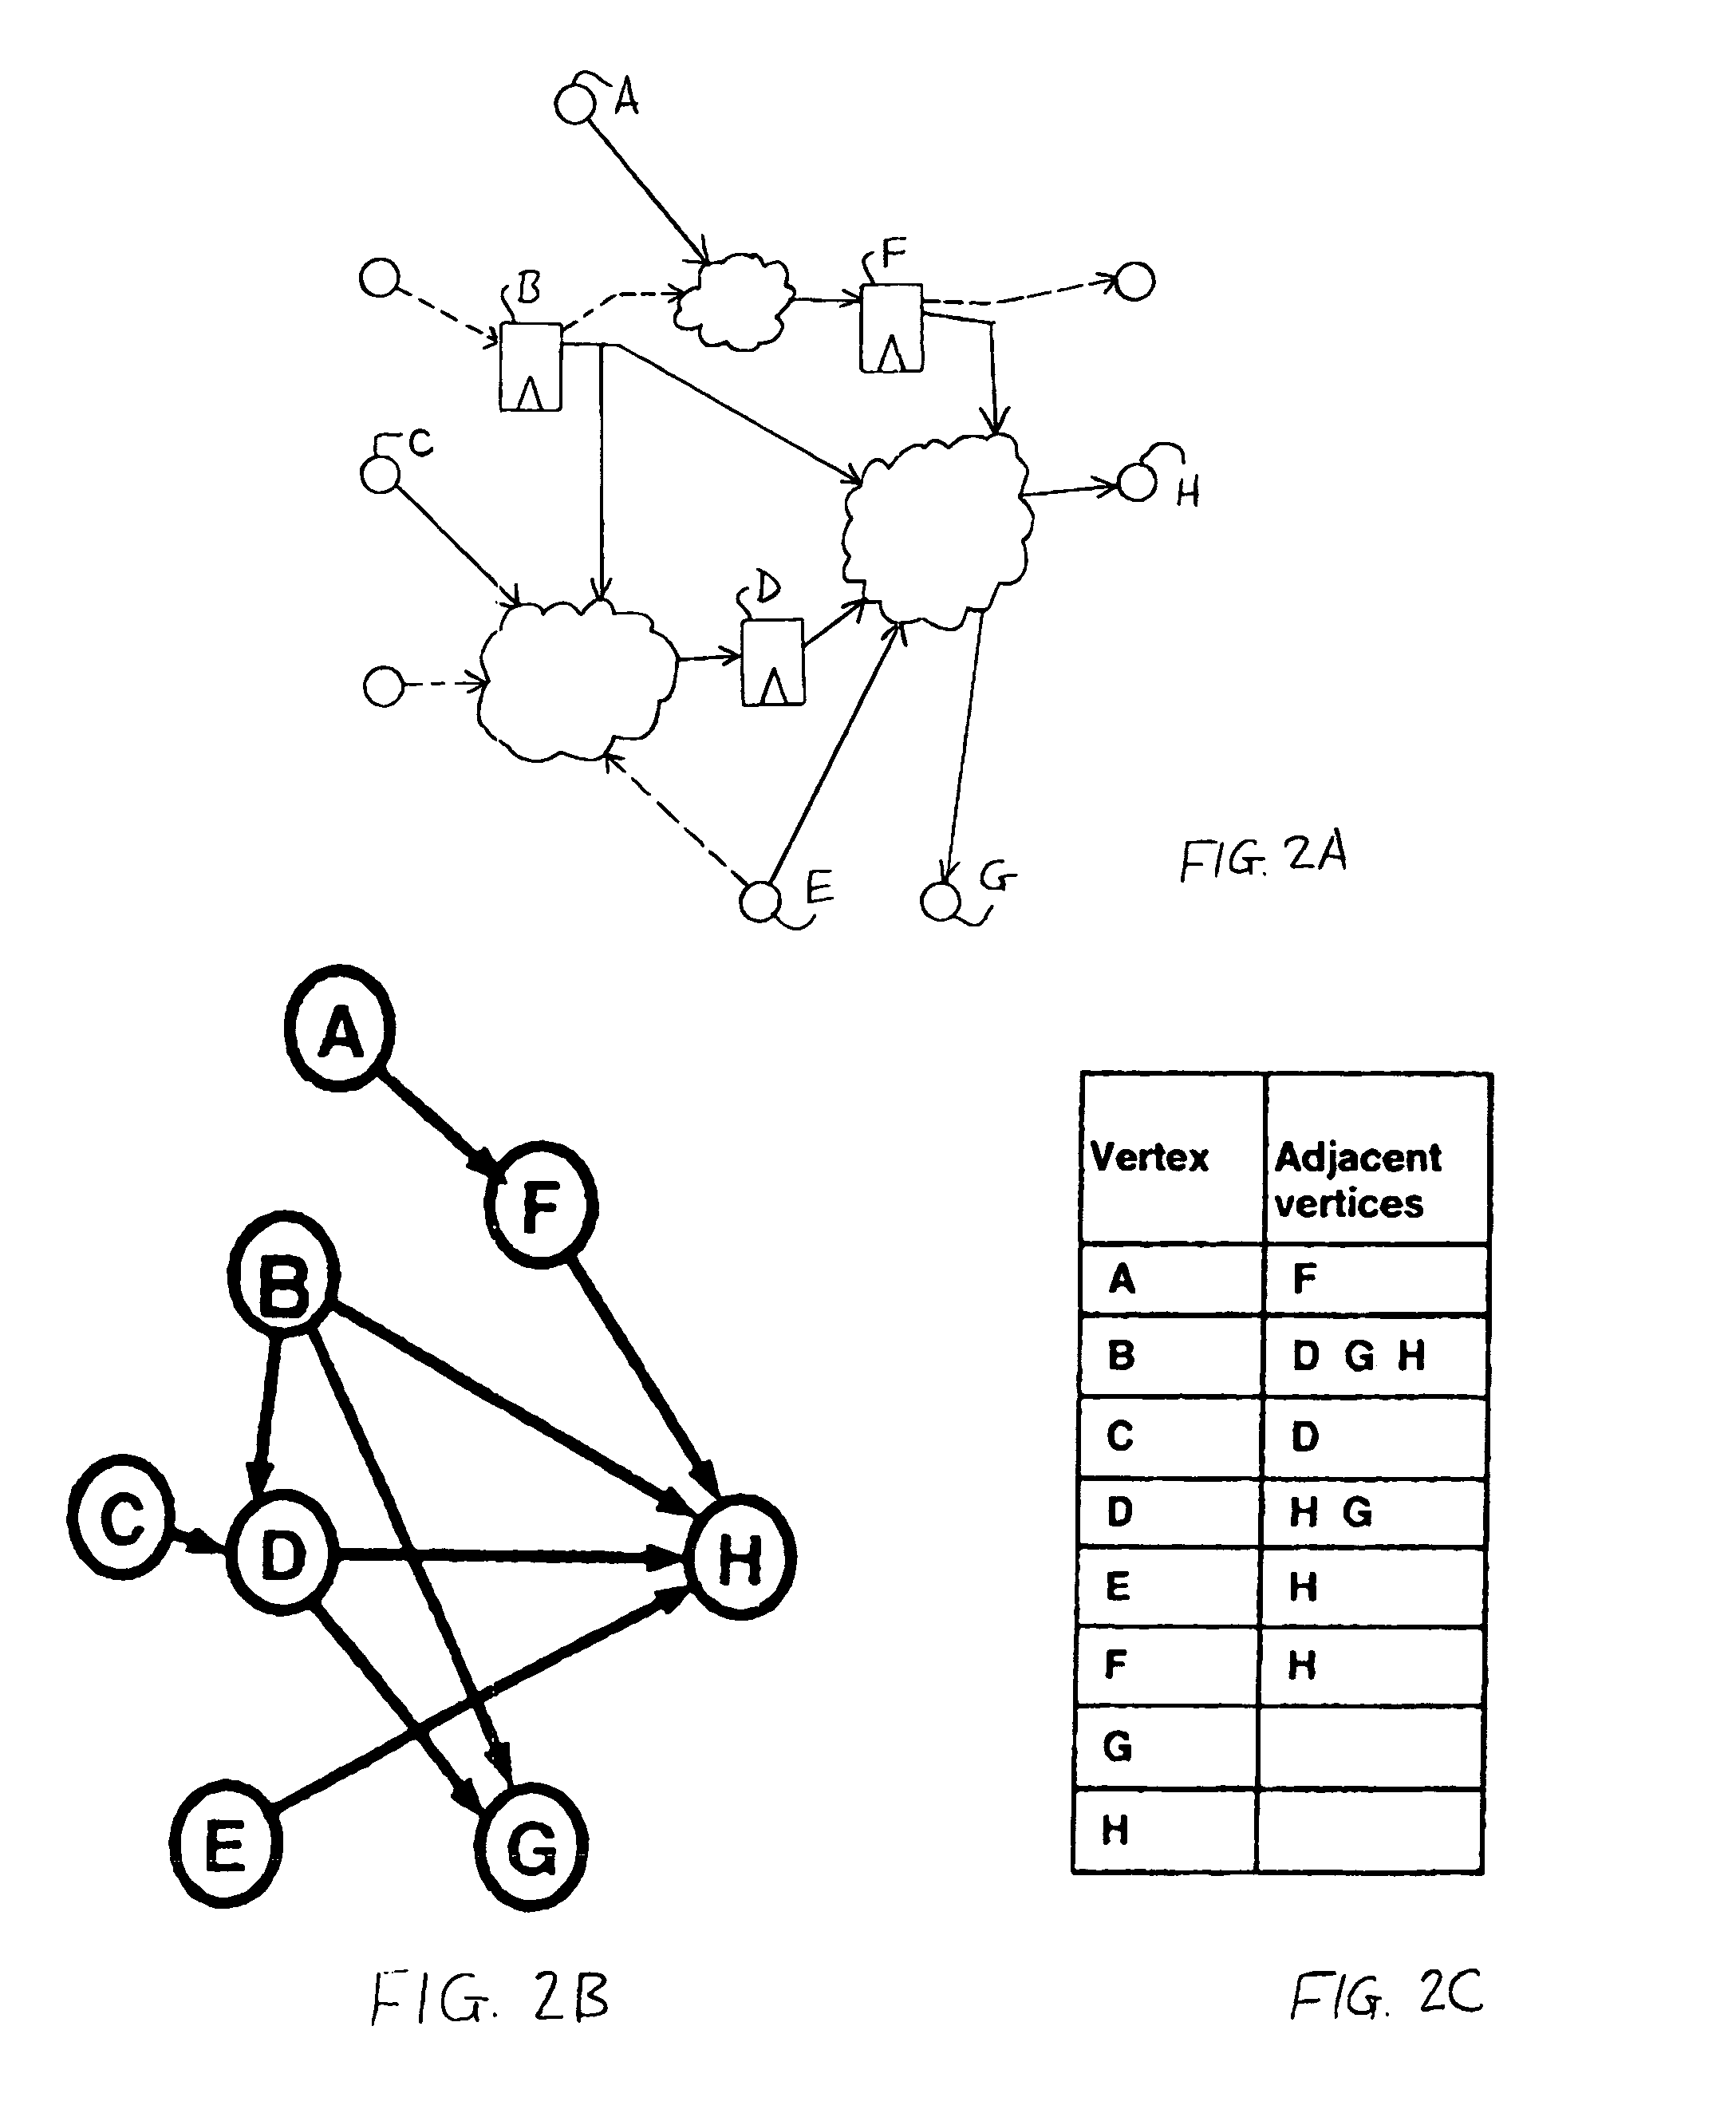 Method to identify geometrically non-overlapping optimization partitions for parallel timing closure